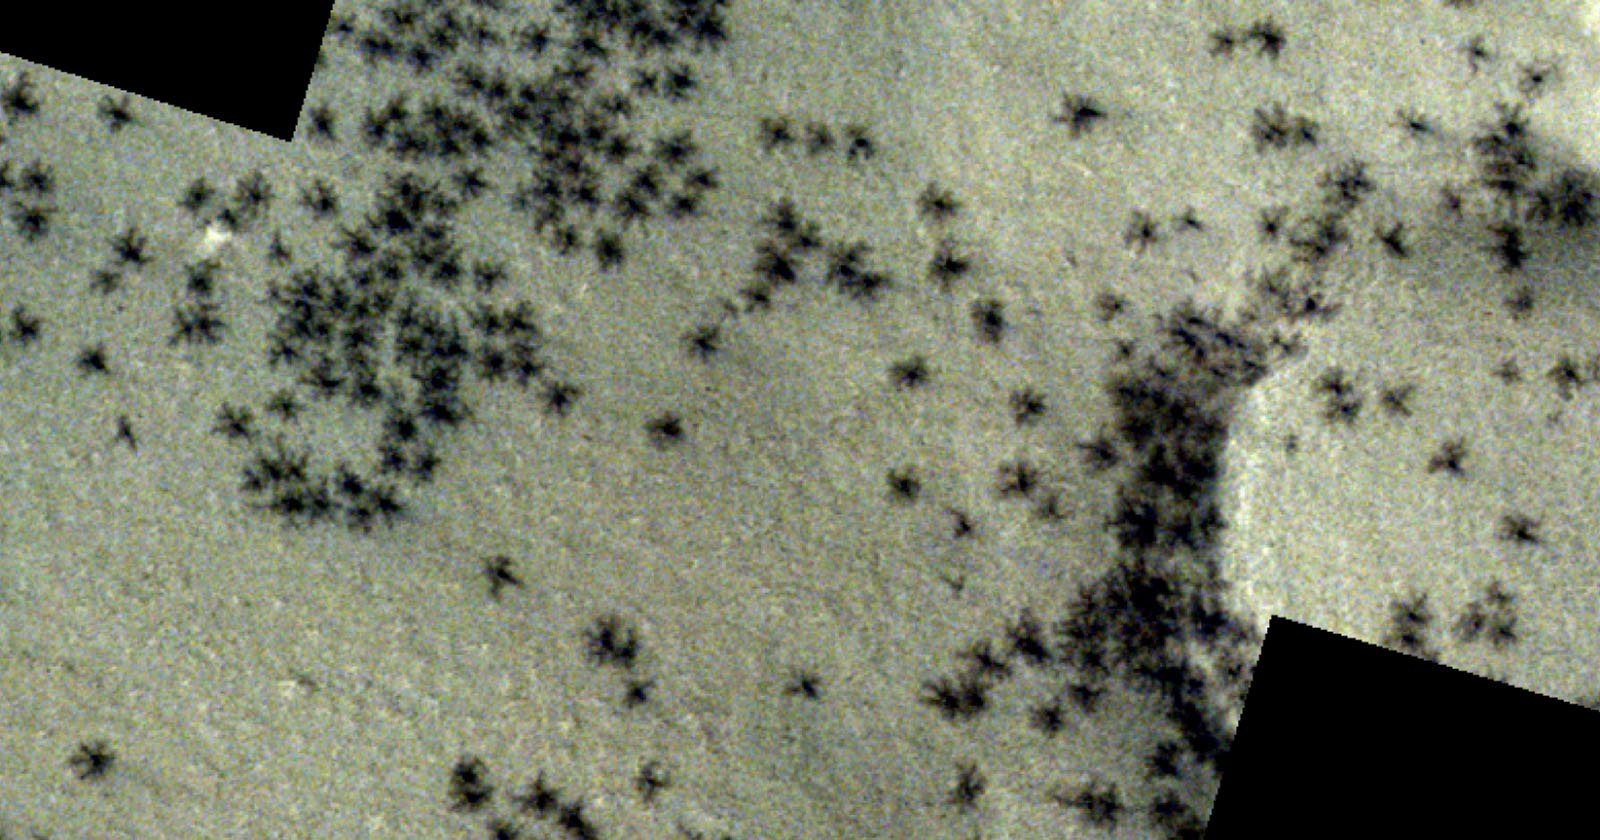 Satellite Photo Shows an Army of ‘Black Spiders’ on Mars